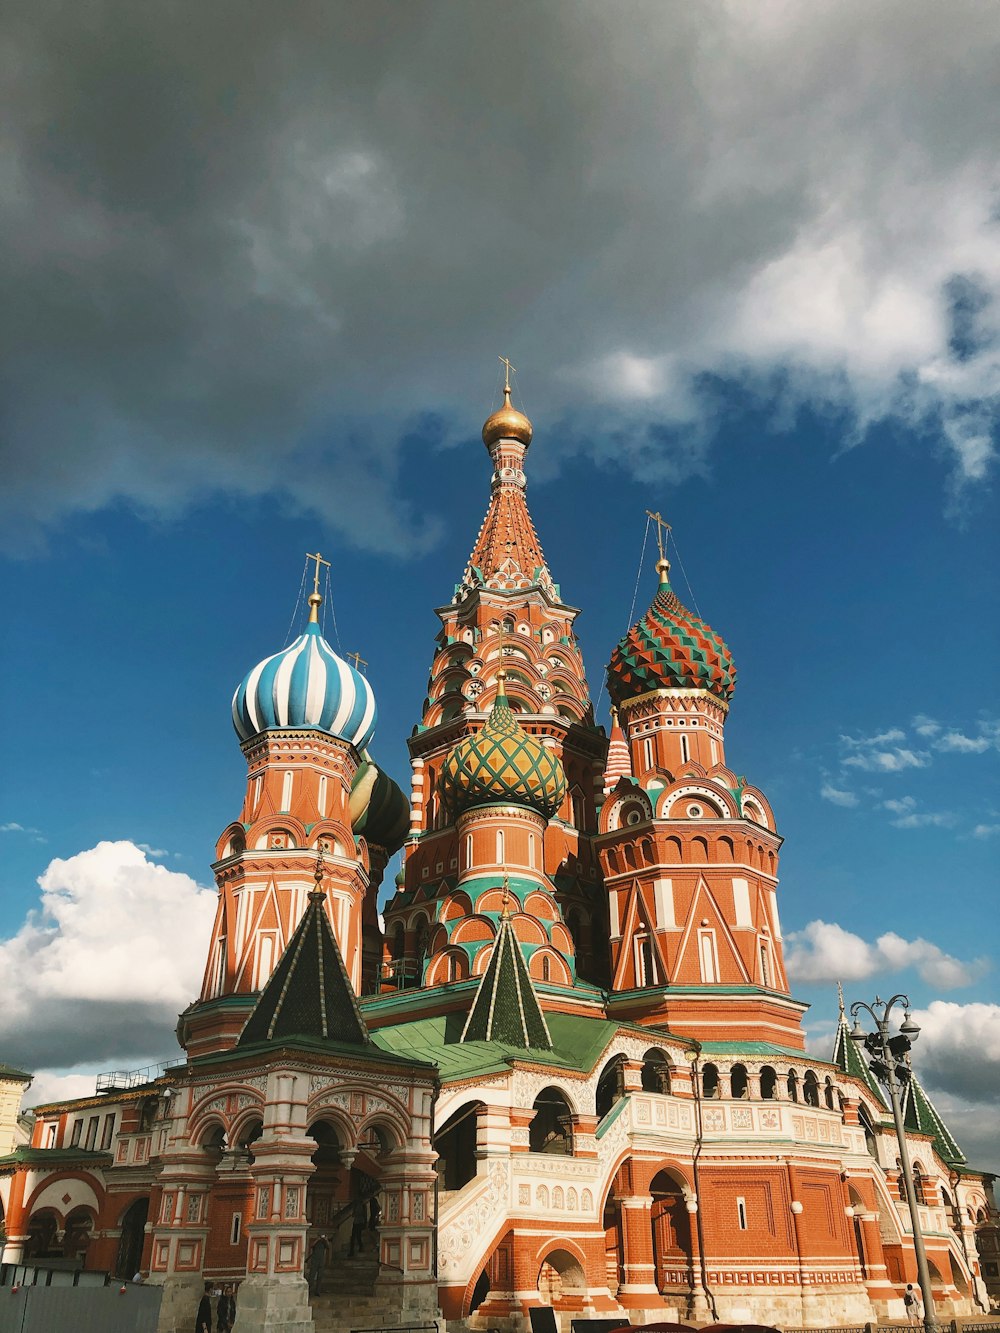 a large ornate building with colorful domes with Saint Basil's Cathedral in the background